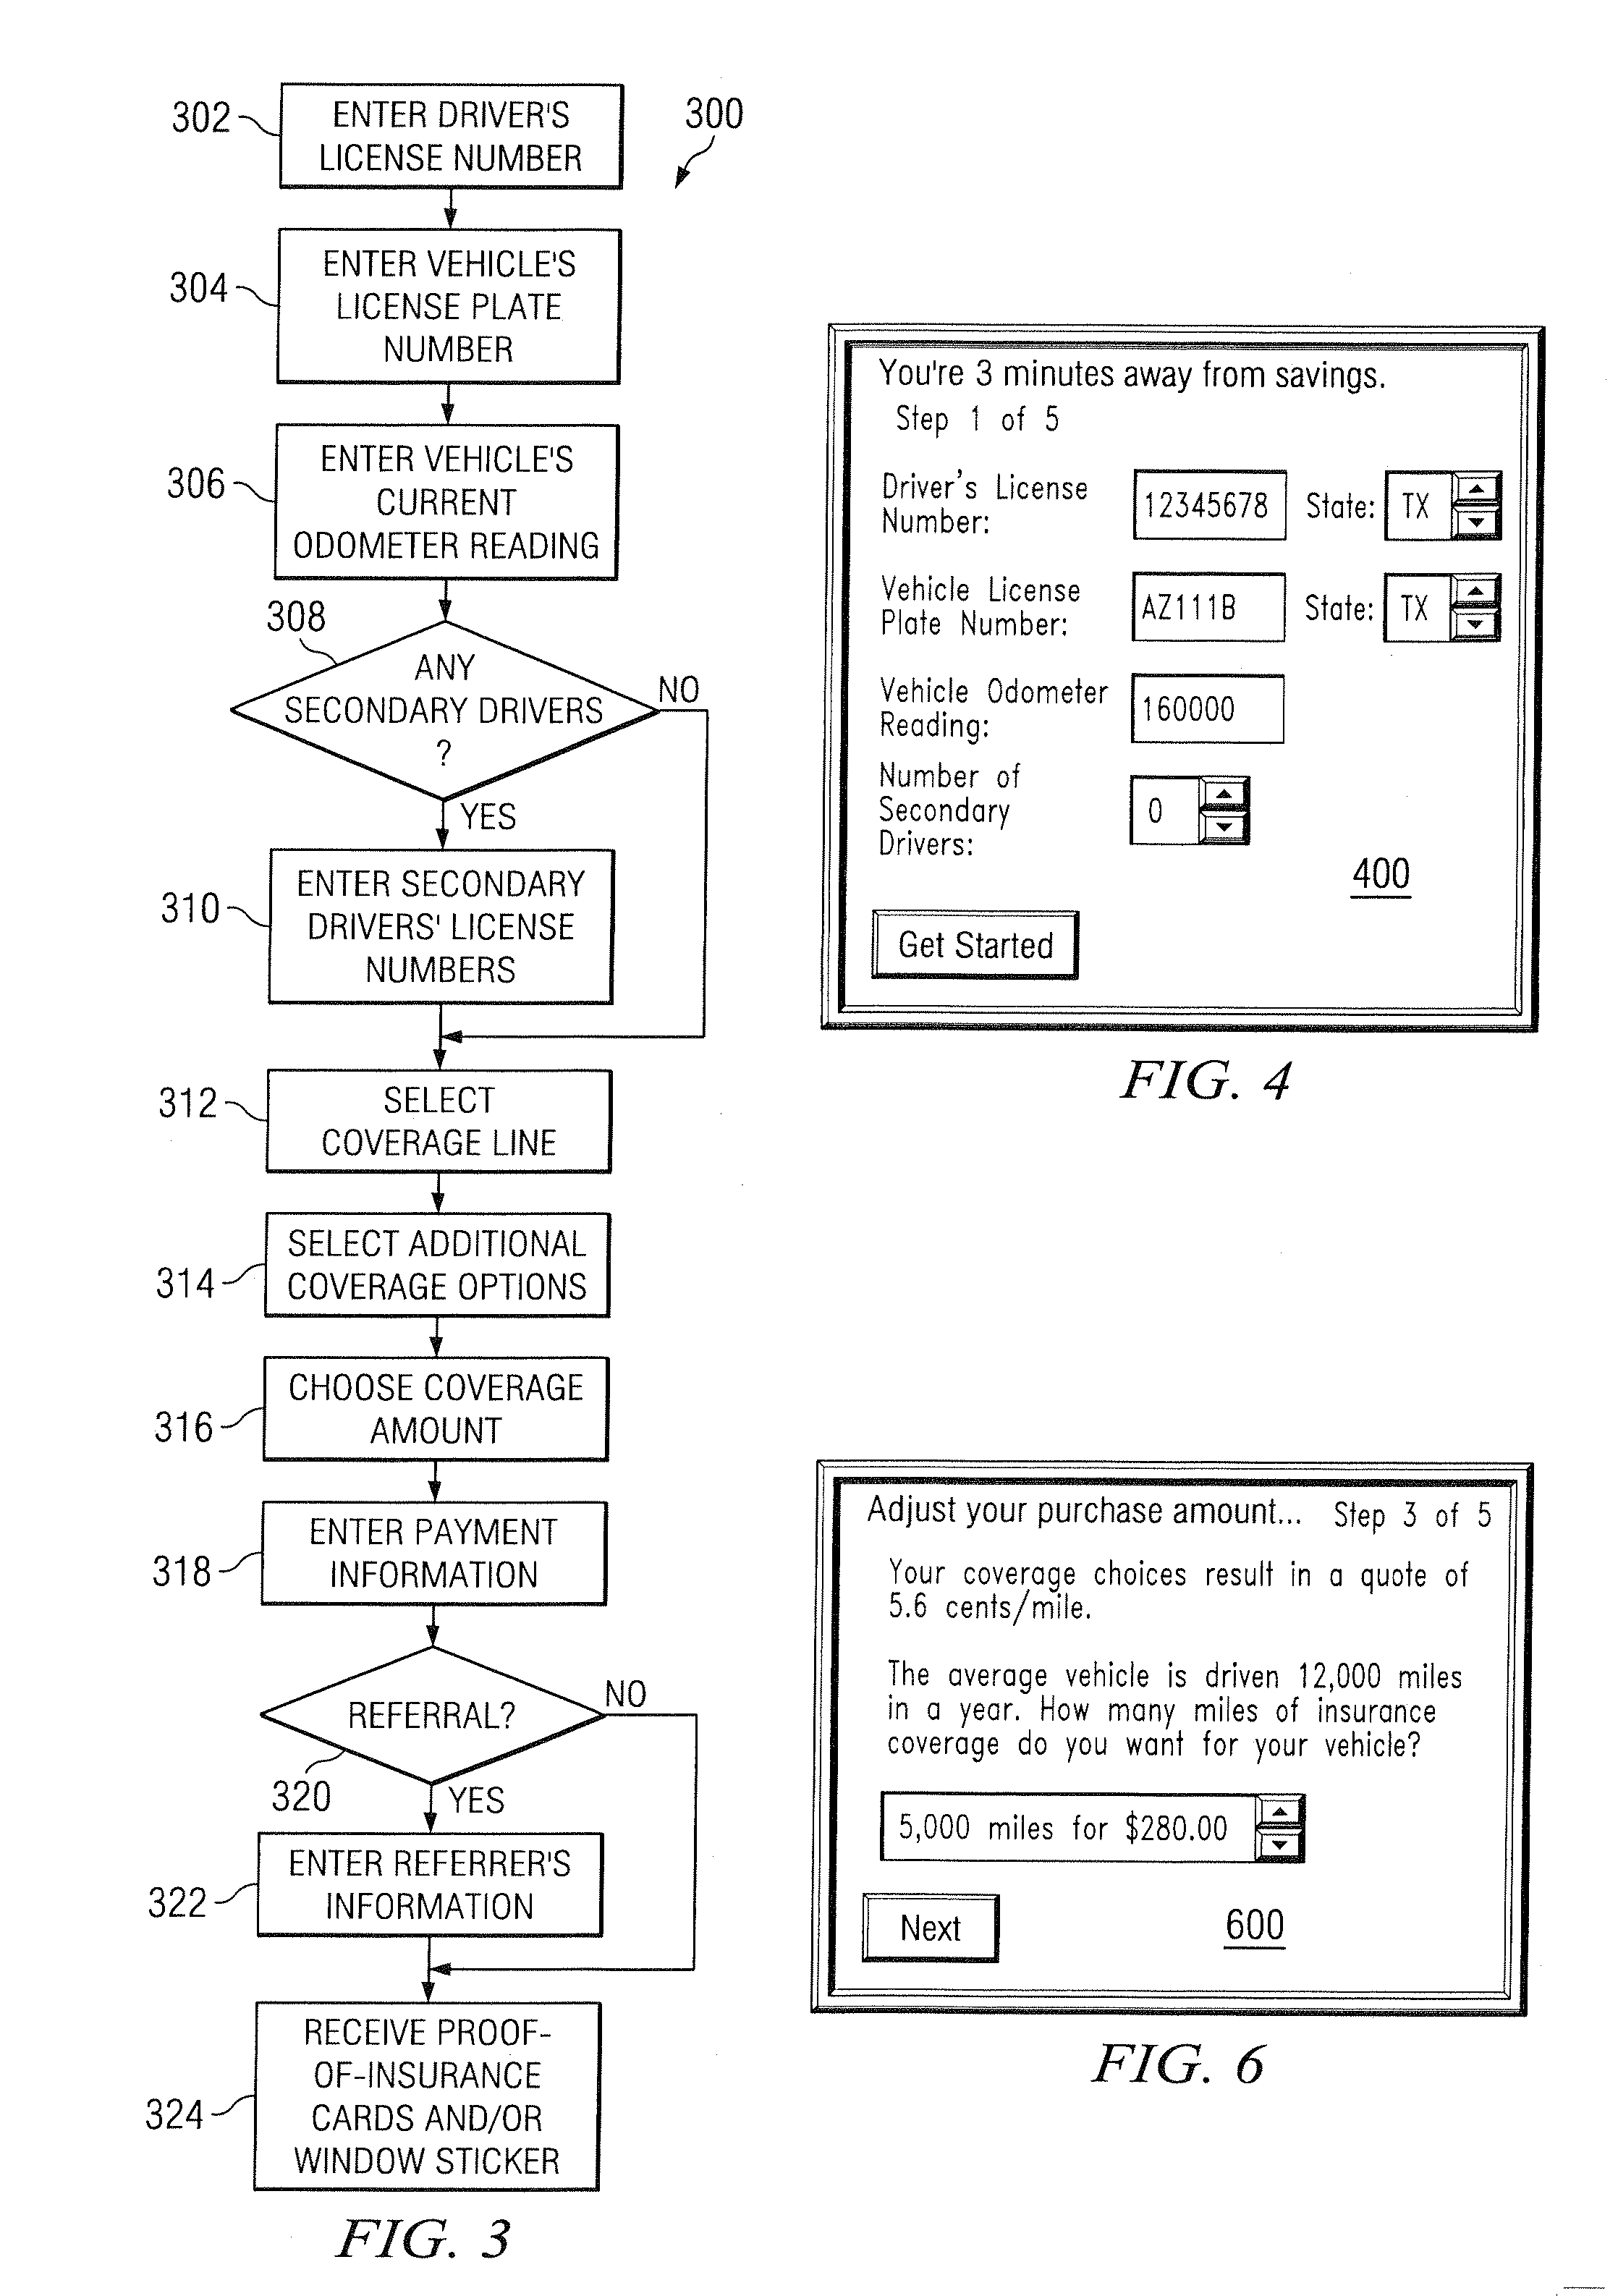 System and Method for Assessing Earned Premium for Distance-Based Vehicle Insurance